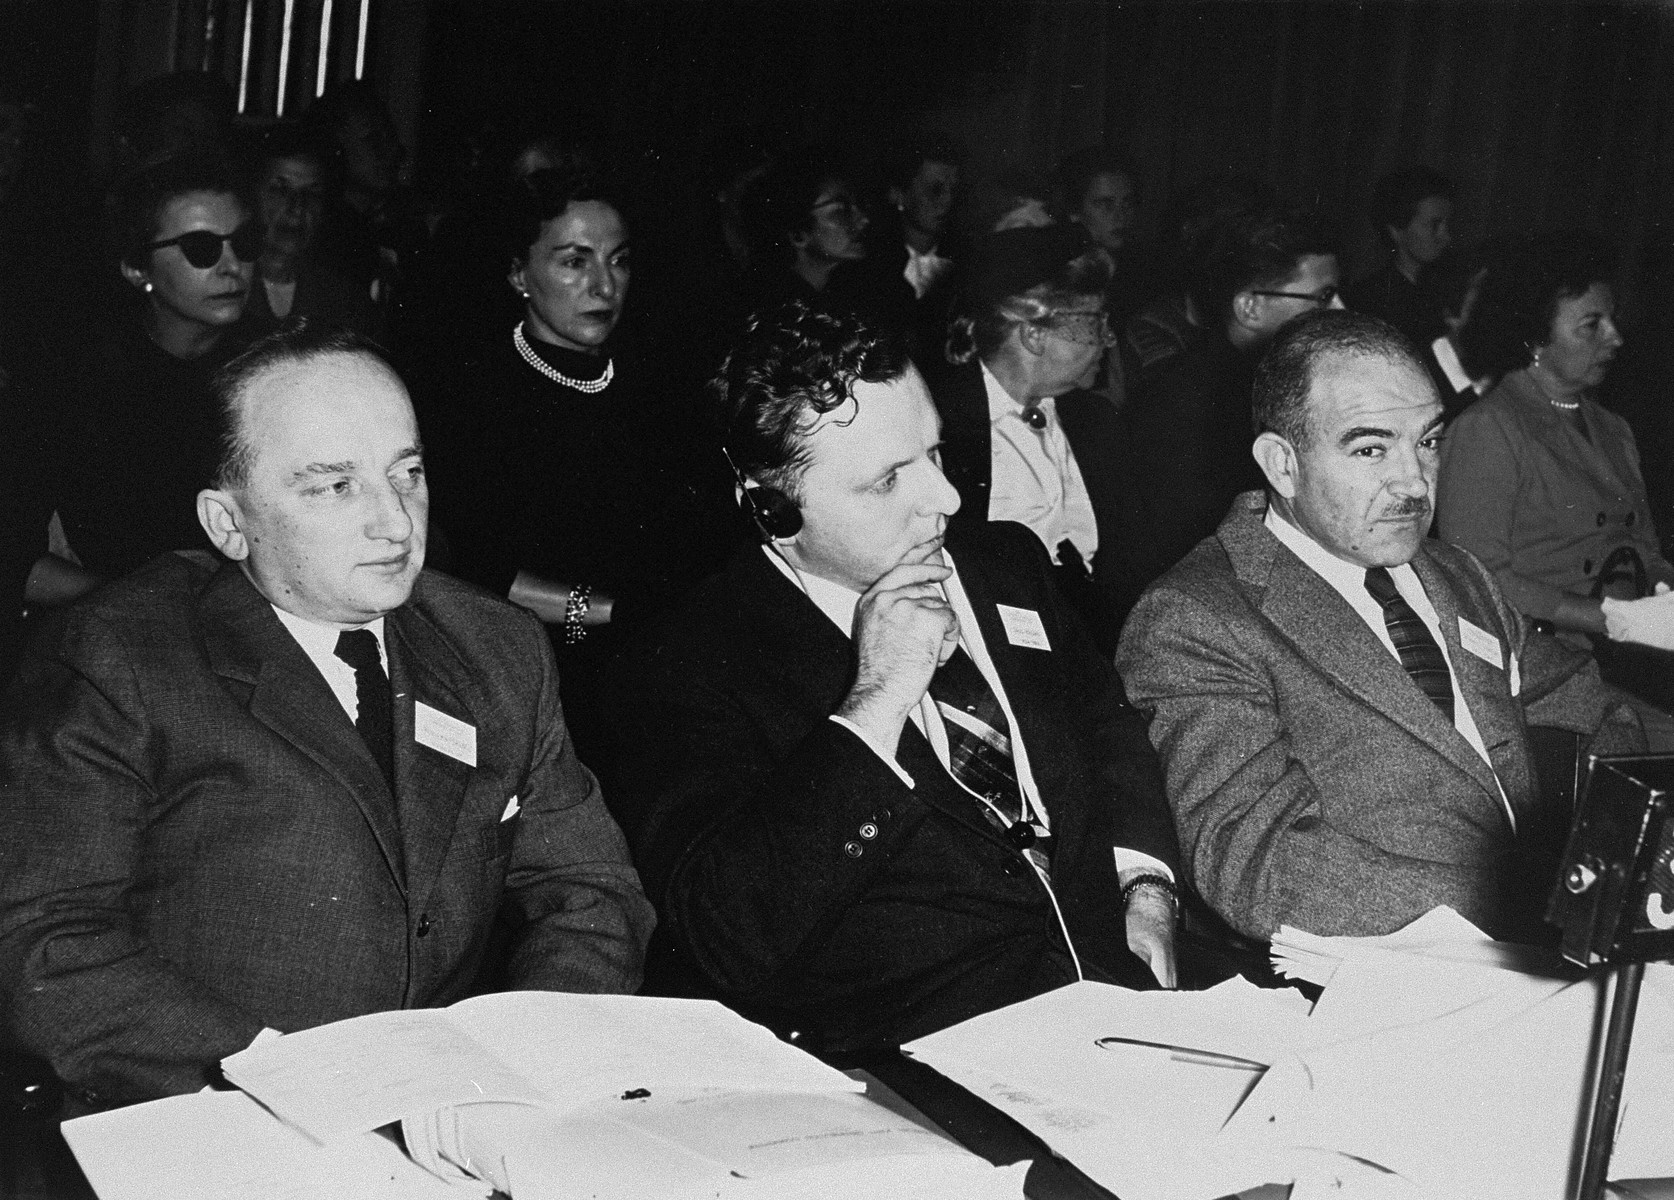 Three Jewish leaders participate in the tenth annual Country Directors Conference of the American Jewish Joint Distribution Committee at UNESCO House.  

Pictured from left to right are: Benjamin Ferencz, Director-general of the Jewish Restitution Successor Organization; Saul Kagan, Secretary of the Conference on Jewish Material Claims; and Dr. Judah J. Shapiro, Cultural Director of the Conference on Jewish Material Claims.